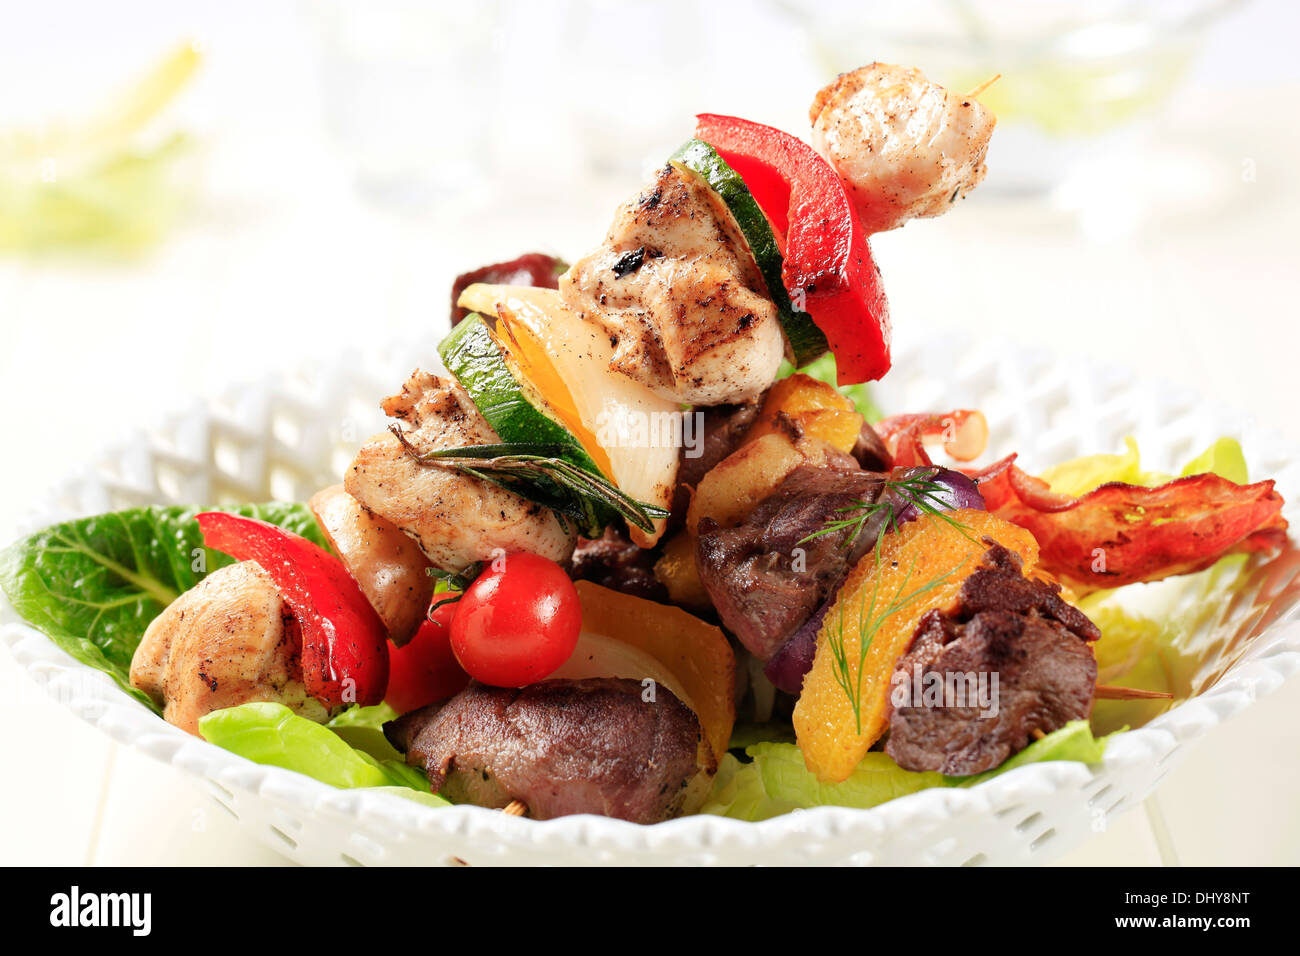 Grilled shish kebabs on lettuce leaves Stock Photo